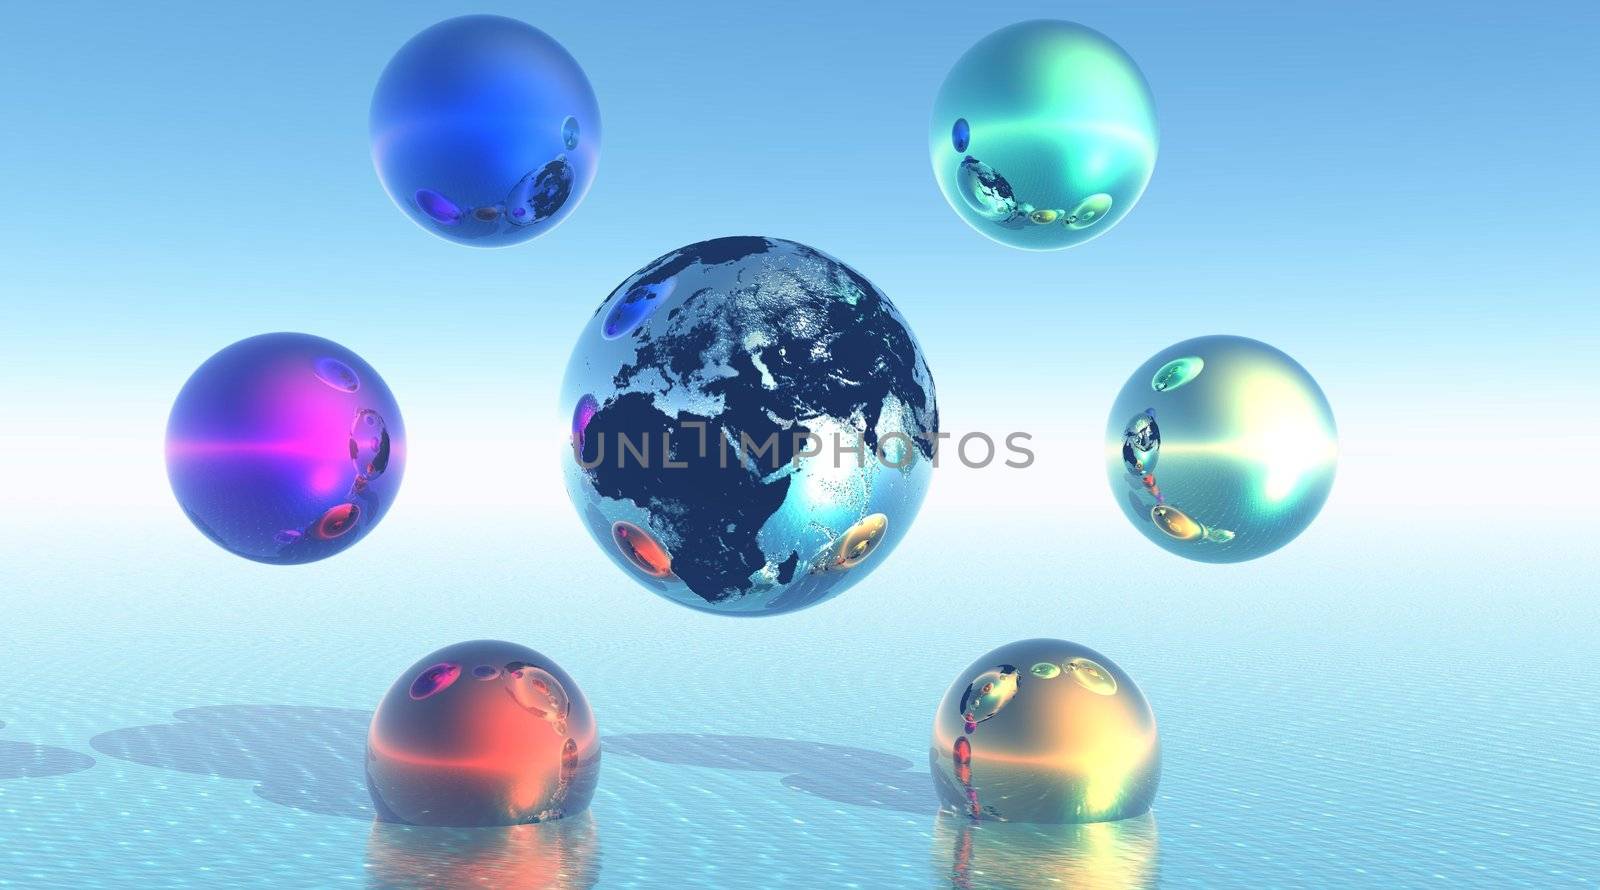 Six balls of different metallic color (violet, blue, green, yellow, orange and red) symbolizing the rainbow and positionned all around a grey metallic earth in a green and yellow background and above the sea